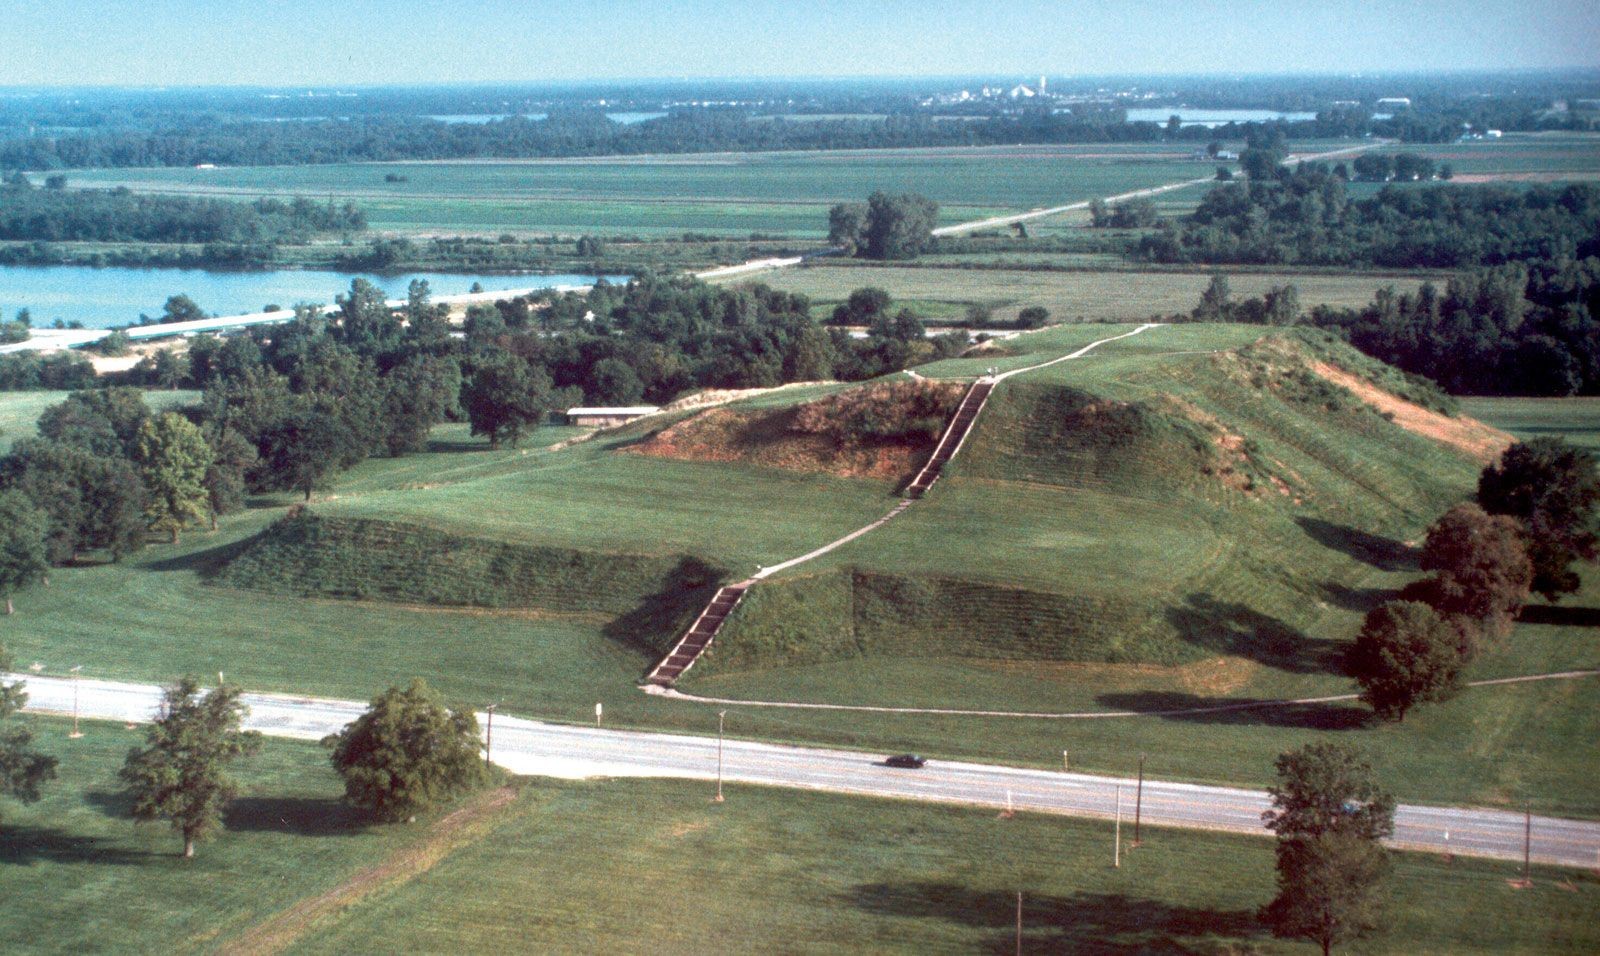 monks-mound-structure-cahokia-mounds-state-historic-1696428514.jpeg